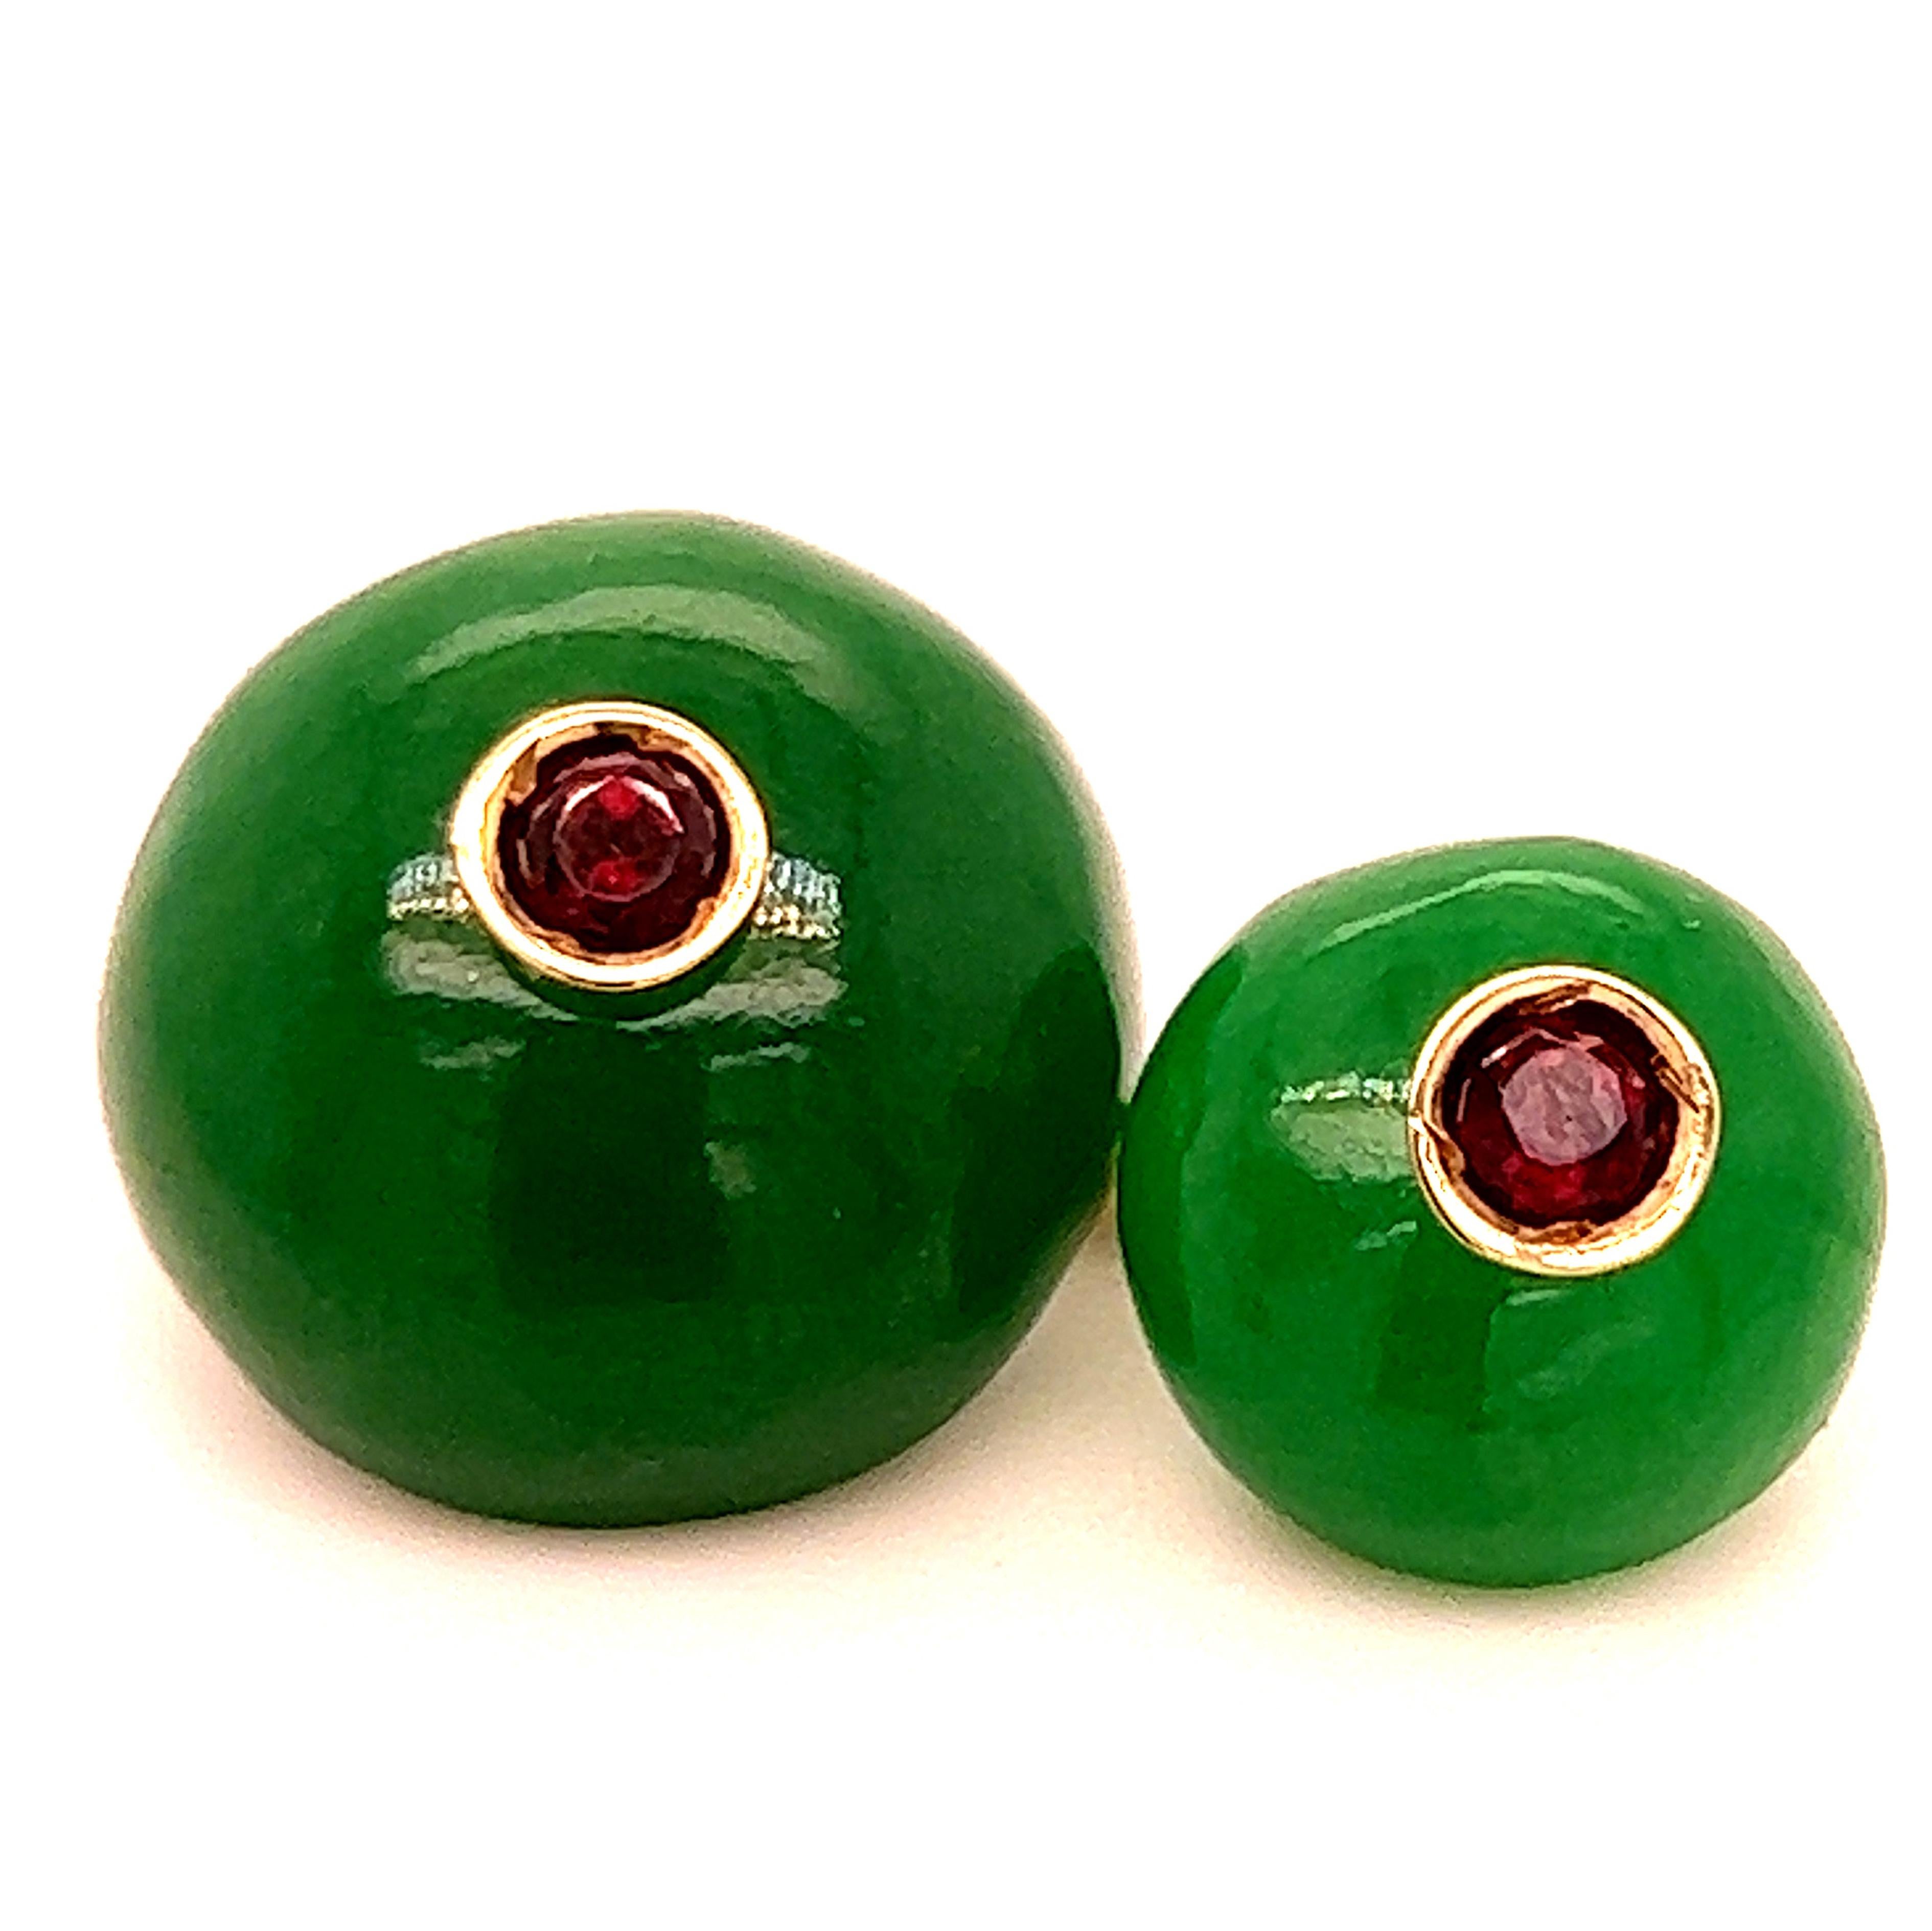 Absolutely Chic, Classy yet Timeless 33.54Kt Round Cabochon Shaped Hand Inlaid Natural Green Jade Cufflinks featuring four natural 0.38 Carat Brilliant Cut Ruby in a Yellow Gold setting.
All our Cufflinks are new, never been previously owned or